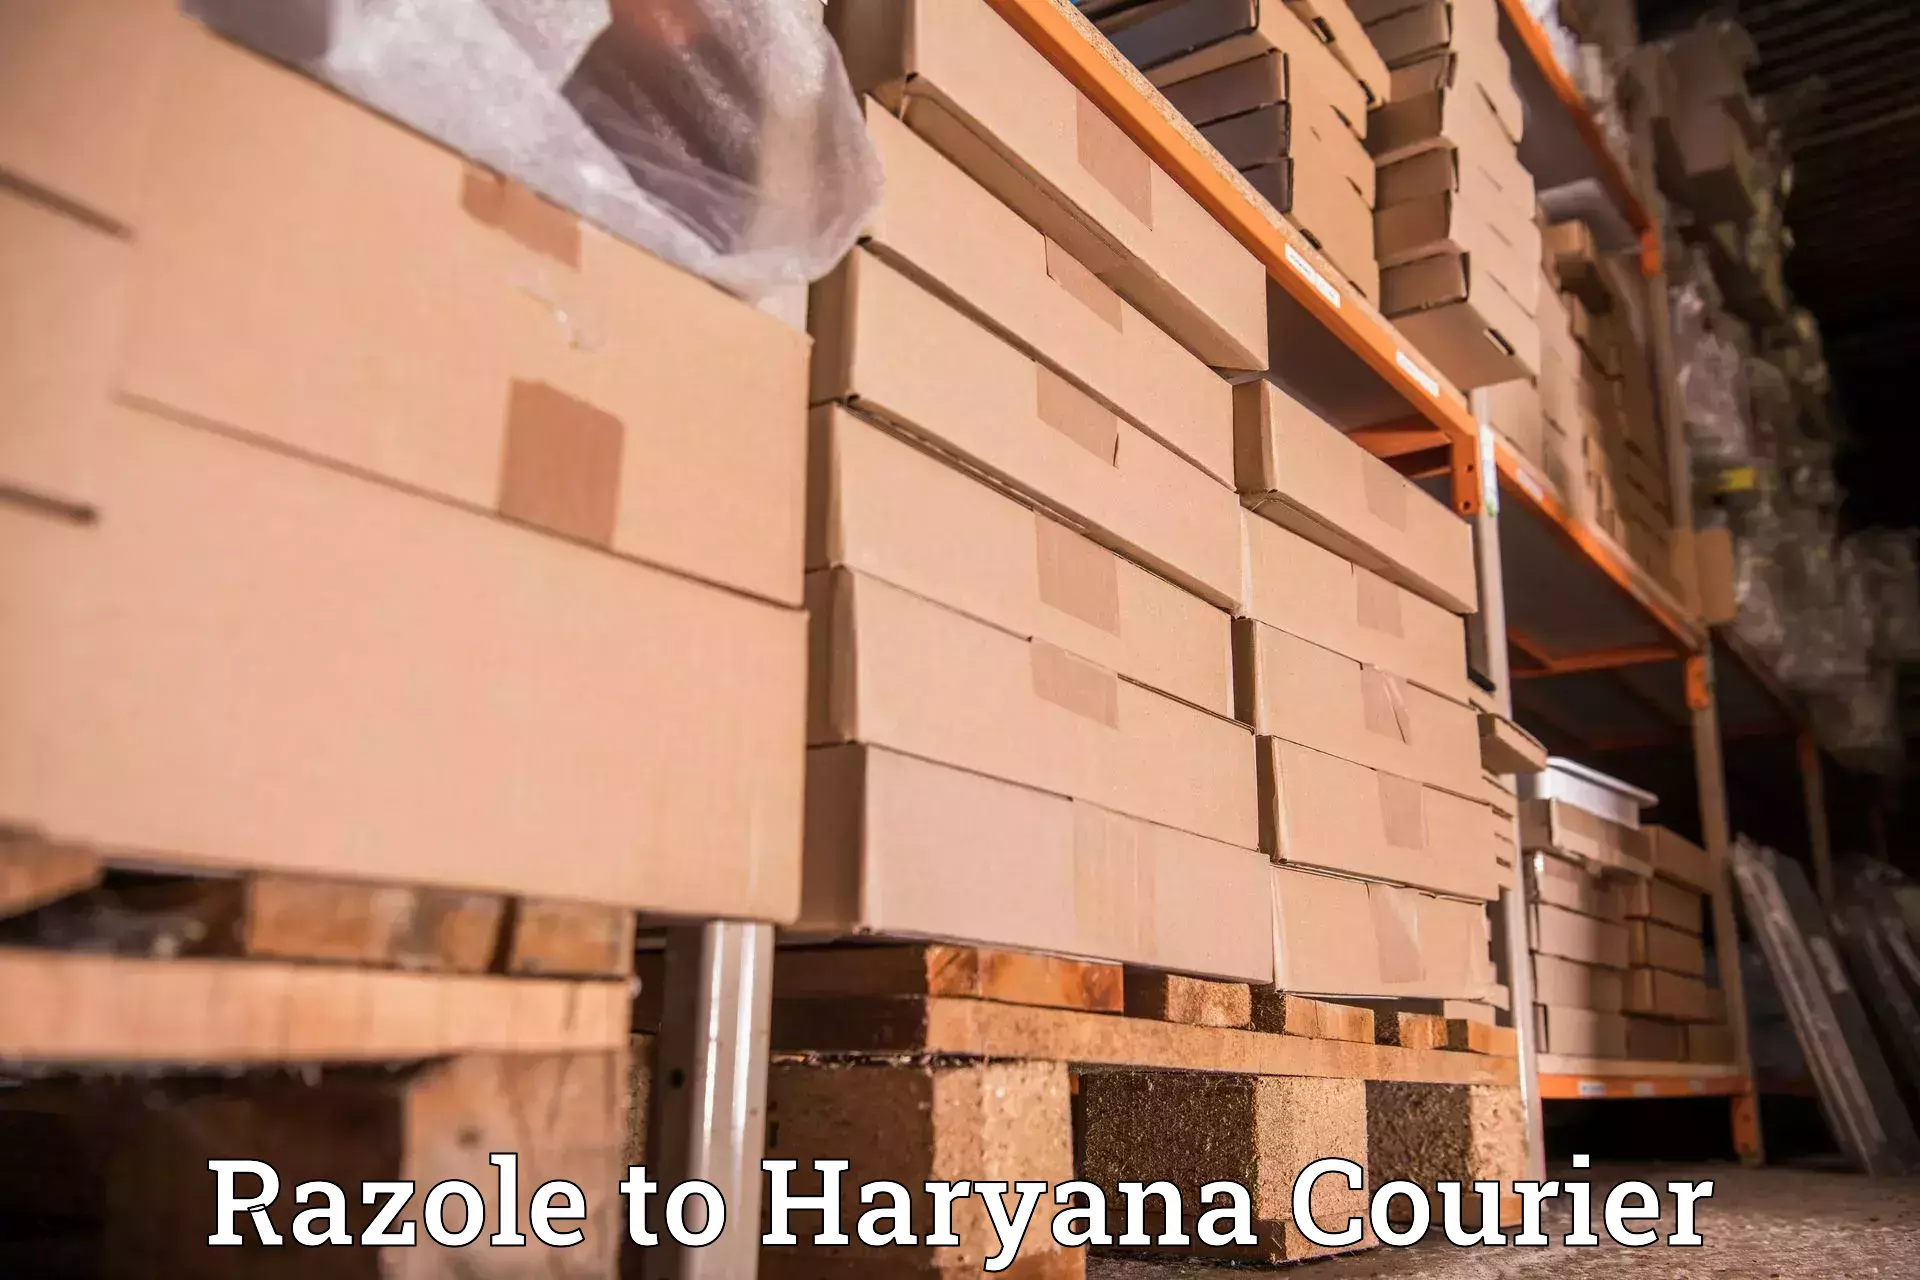 Next-day delivery options Razole to Haryana